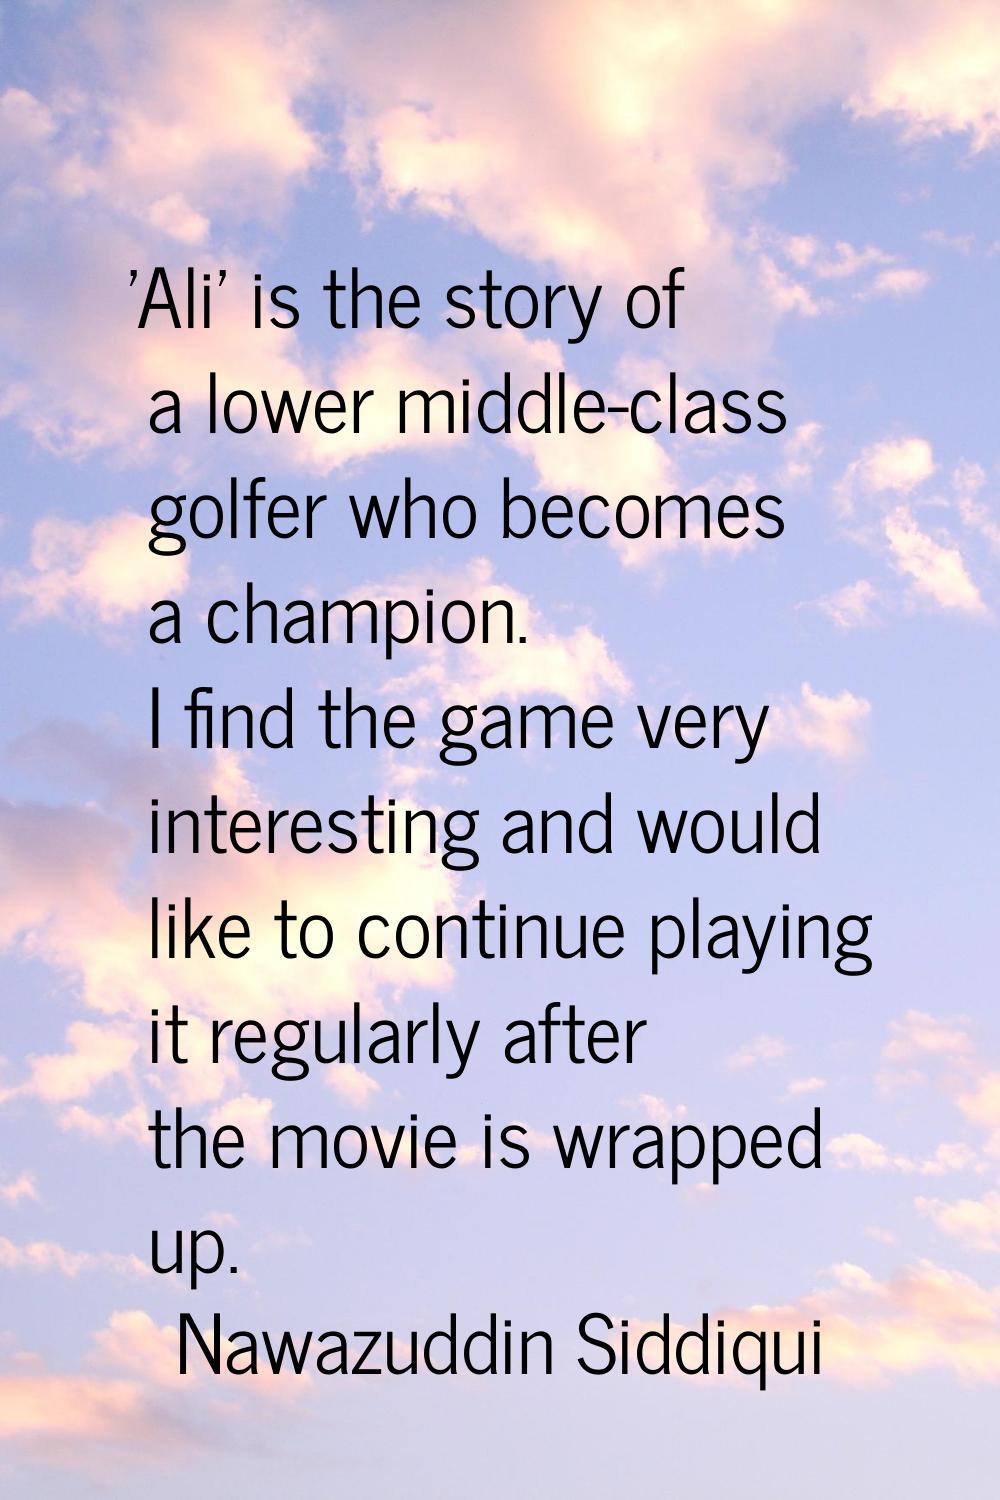 'Ali' is the story of a lower middle-class golfer who becomes a champion. I find the game very inte